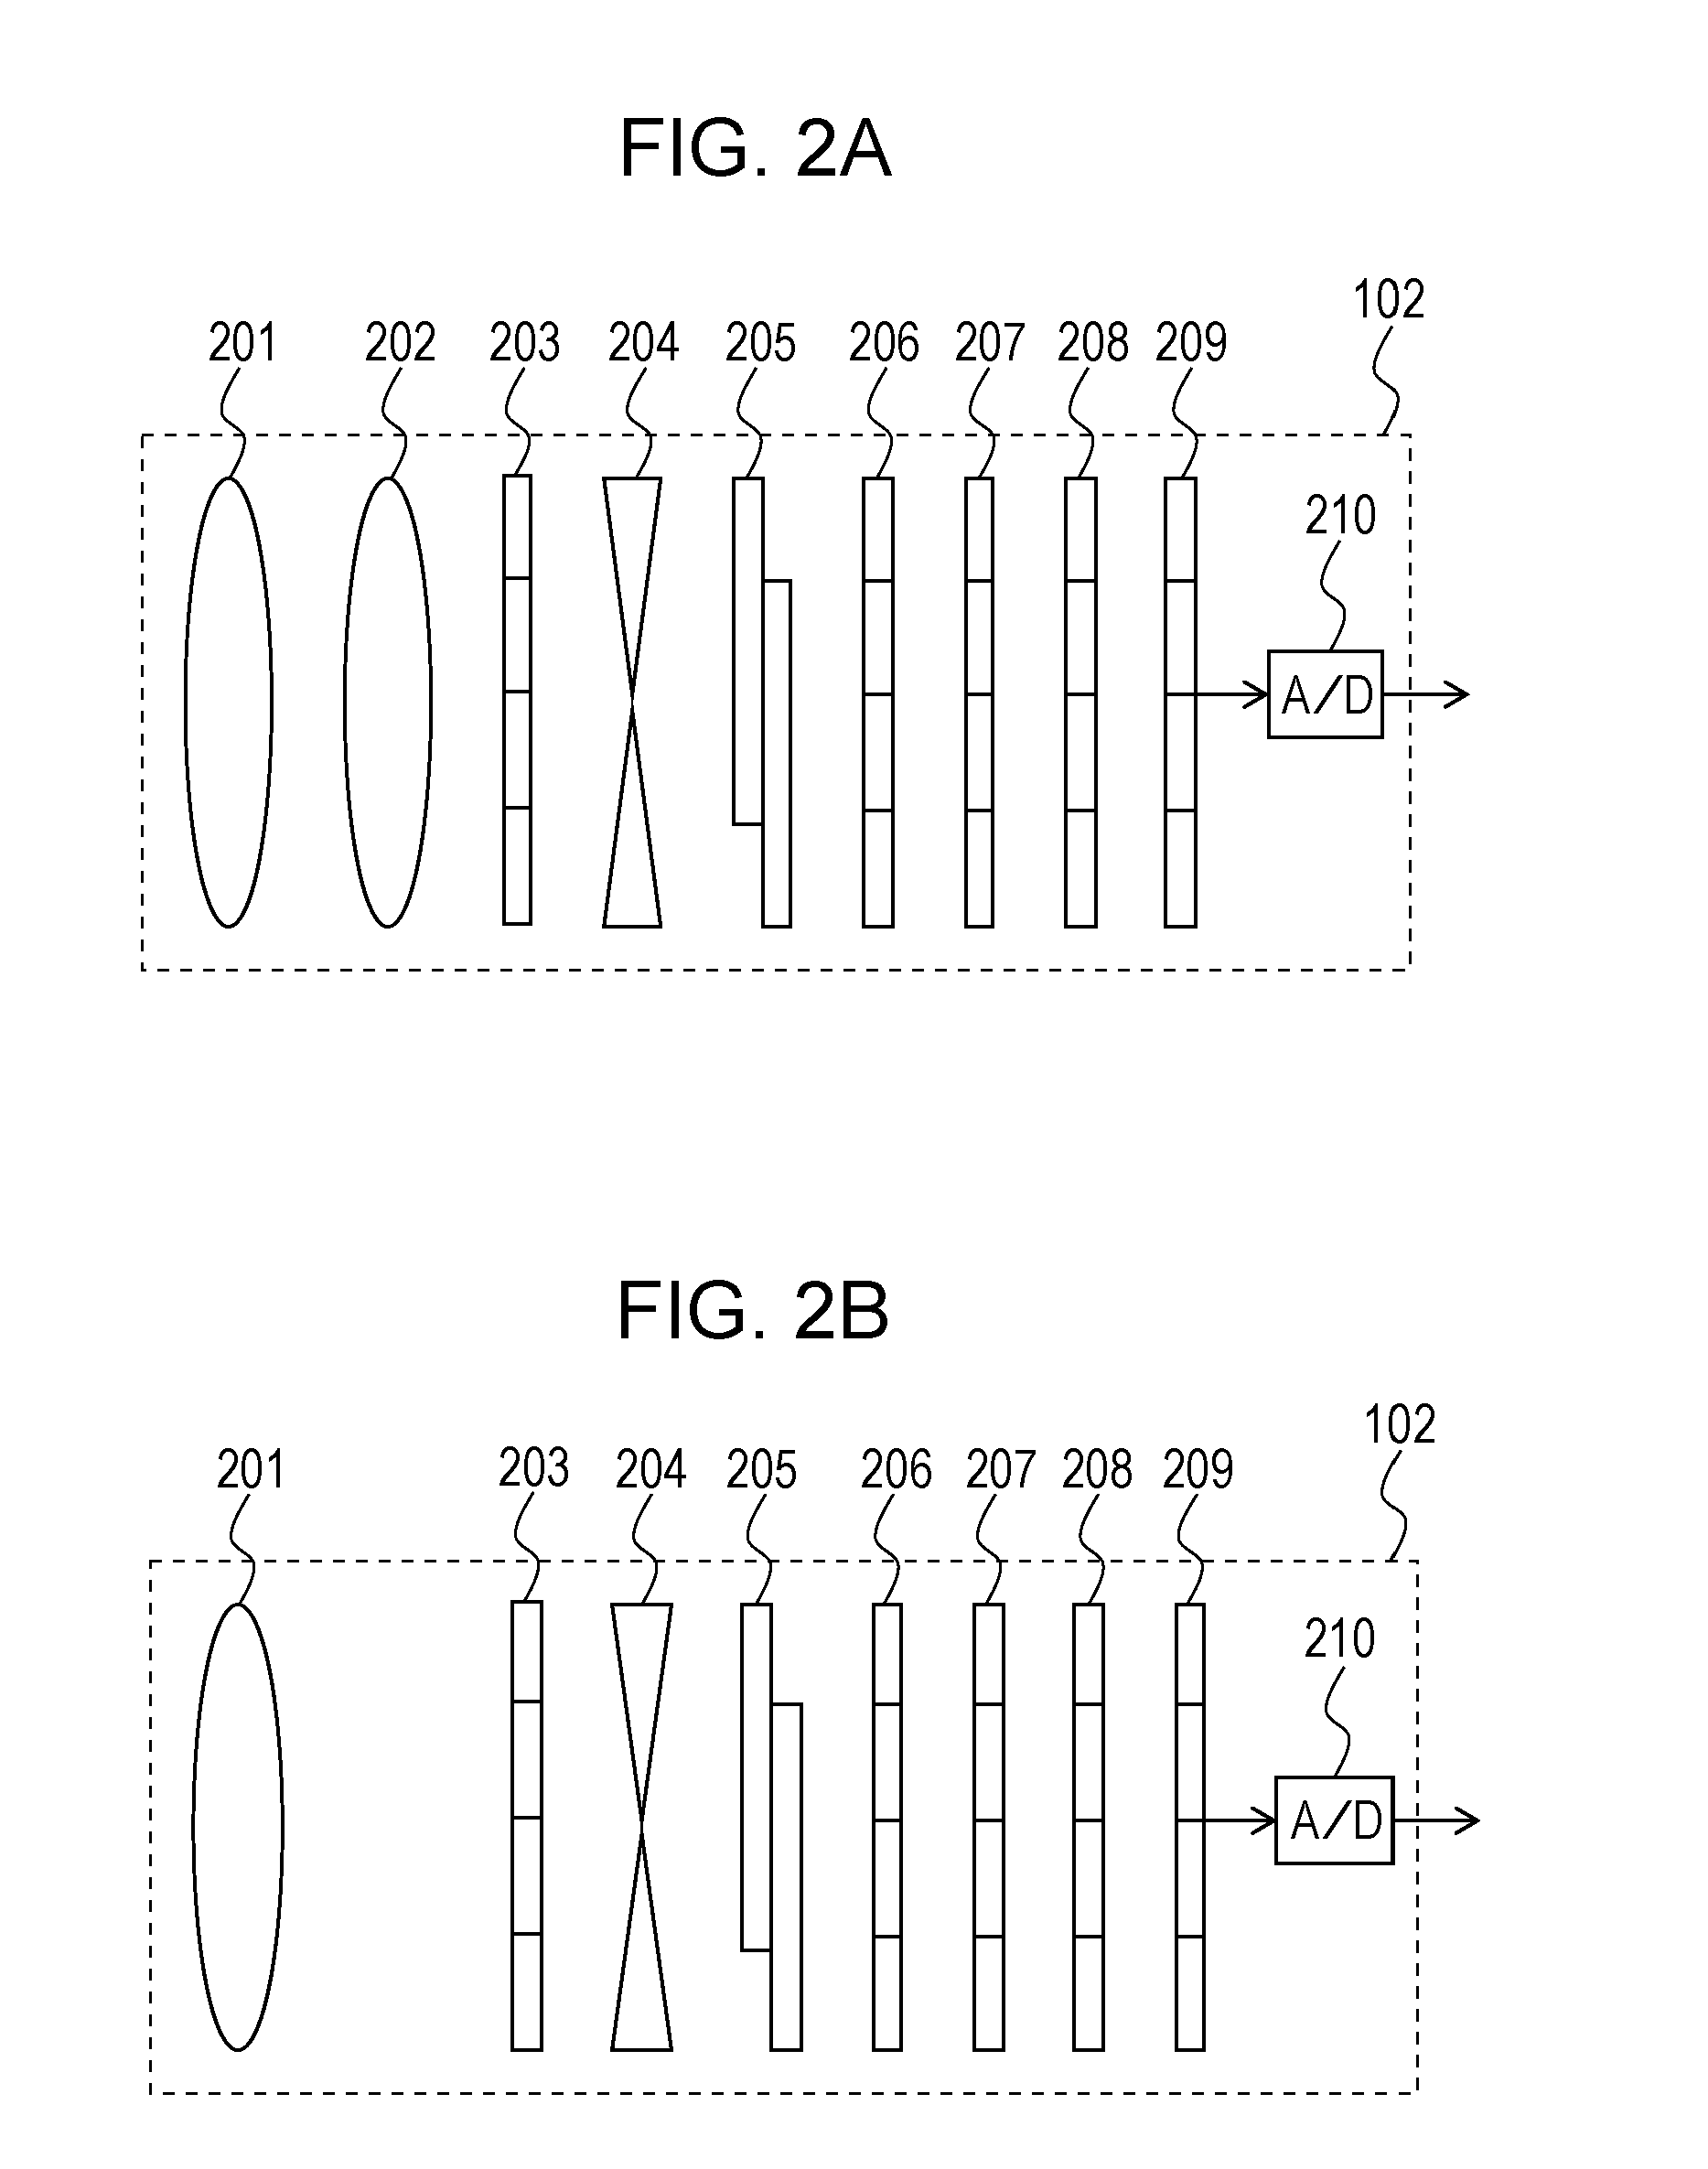 Image processing apparatus, image capturing apparatus, image processing method, image capturing method, and non-transitory computer-readable medium for focus bracketing